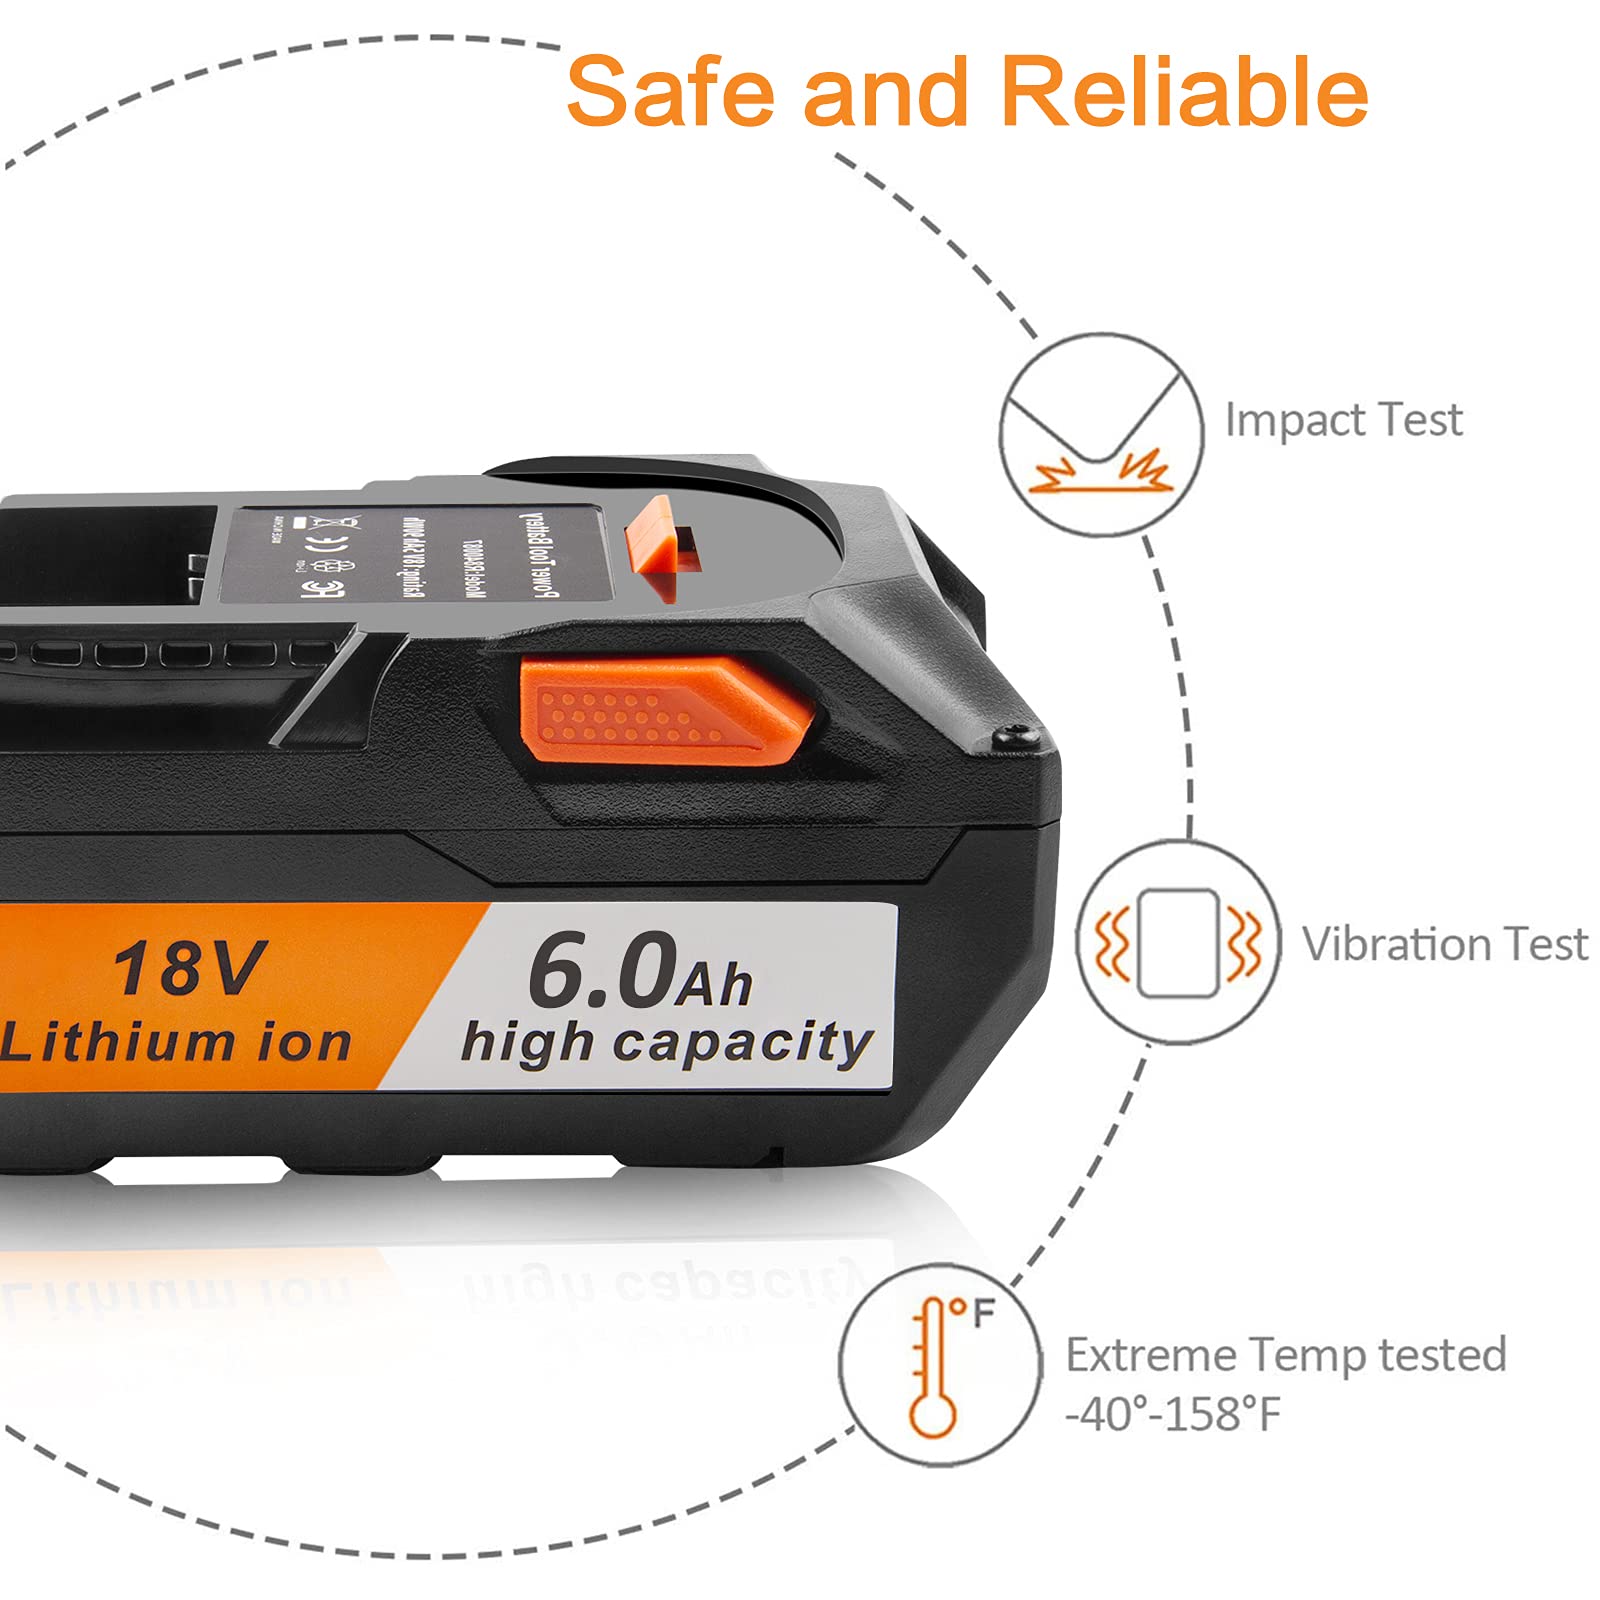 TREE.NB 18V 6.0Ah Lithium Battery - Replacement for Ridgid Power Tool Battery AC840087 R840083 R840085 R840086 R840087 R840089 AC840085 AC840086 AC840087P AC840089 AC840094 Cordless Tools (2 Packs)